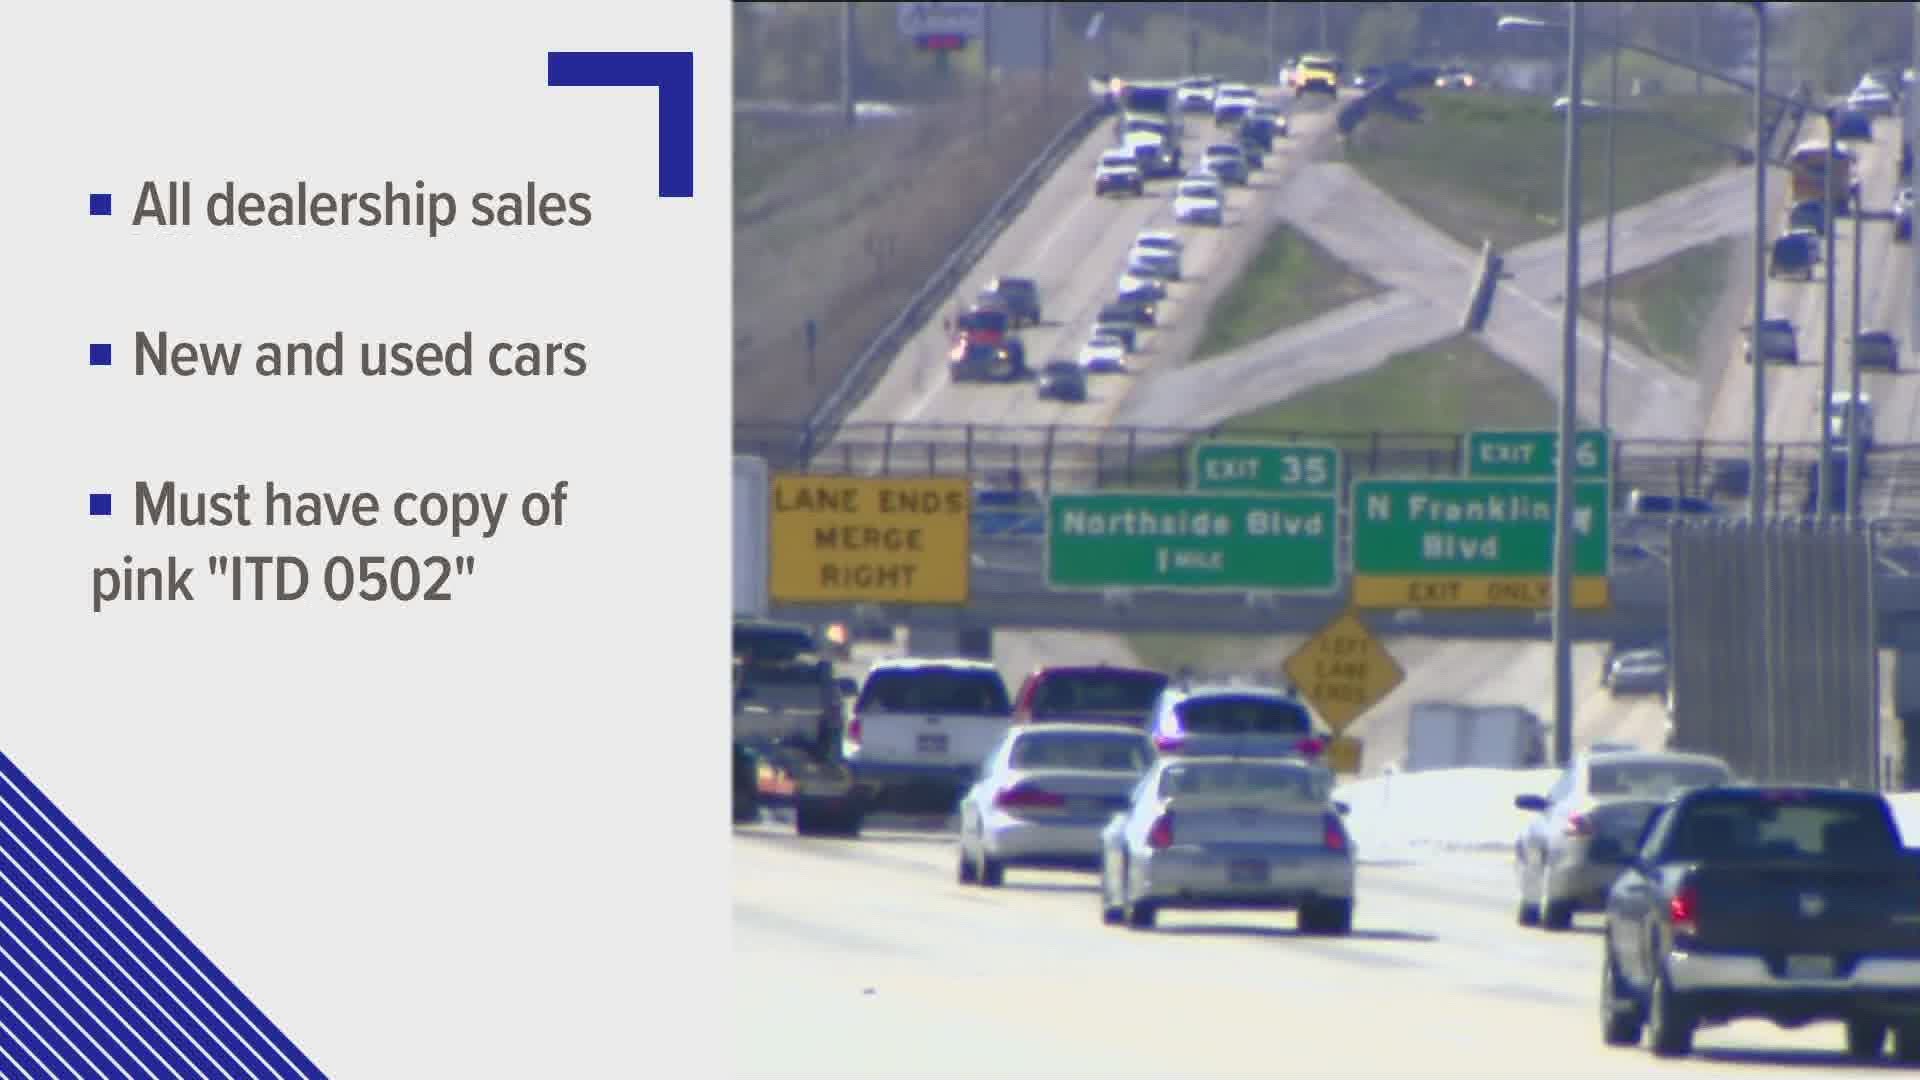 The Idaho Transportation Department says this applies to new and used vehicles bought at the dealership.